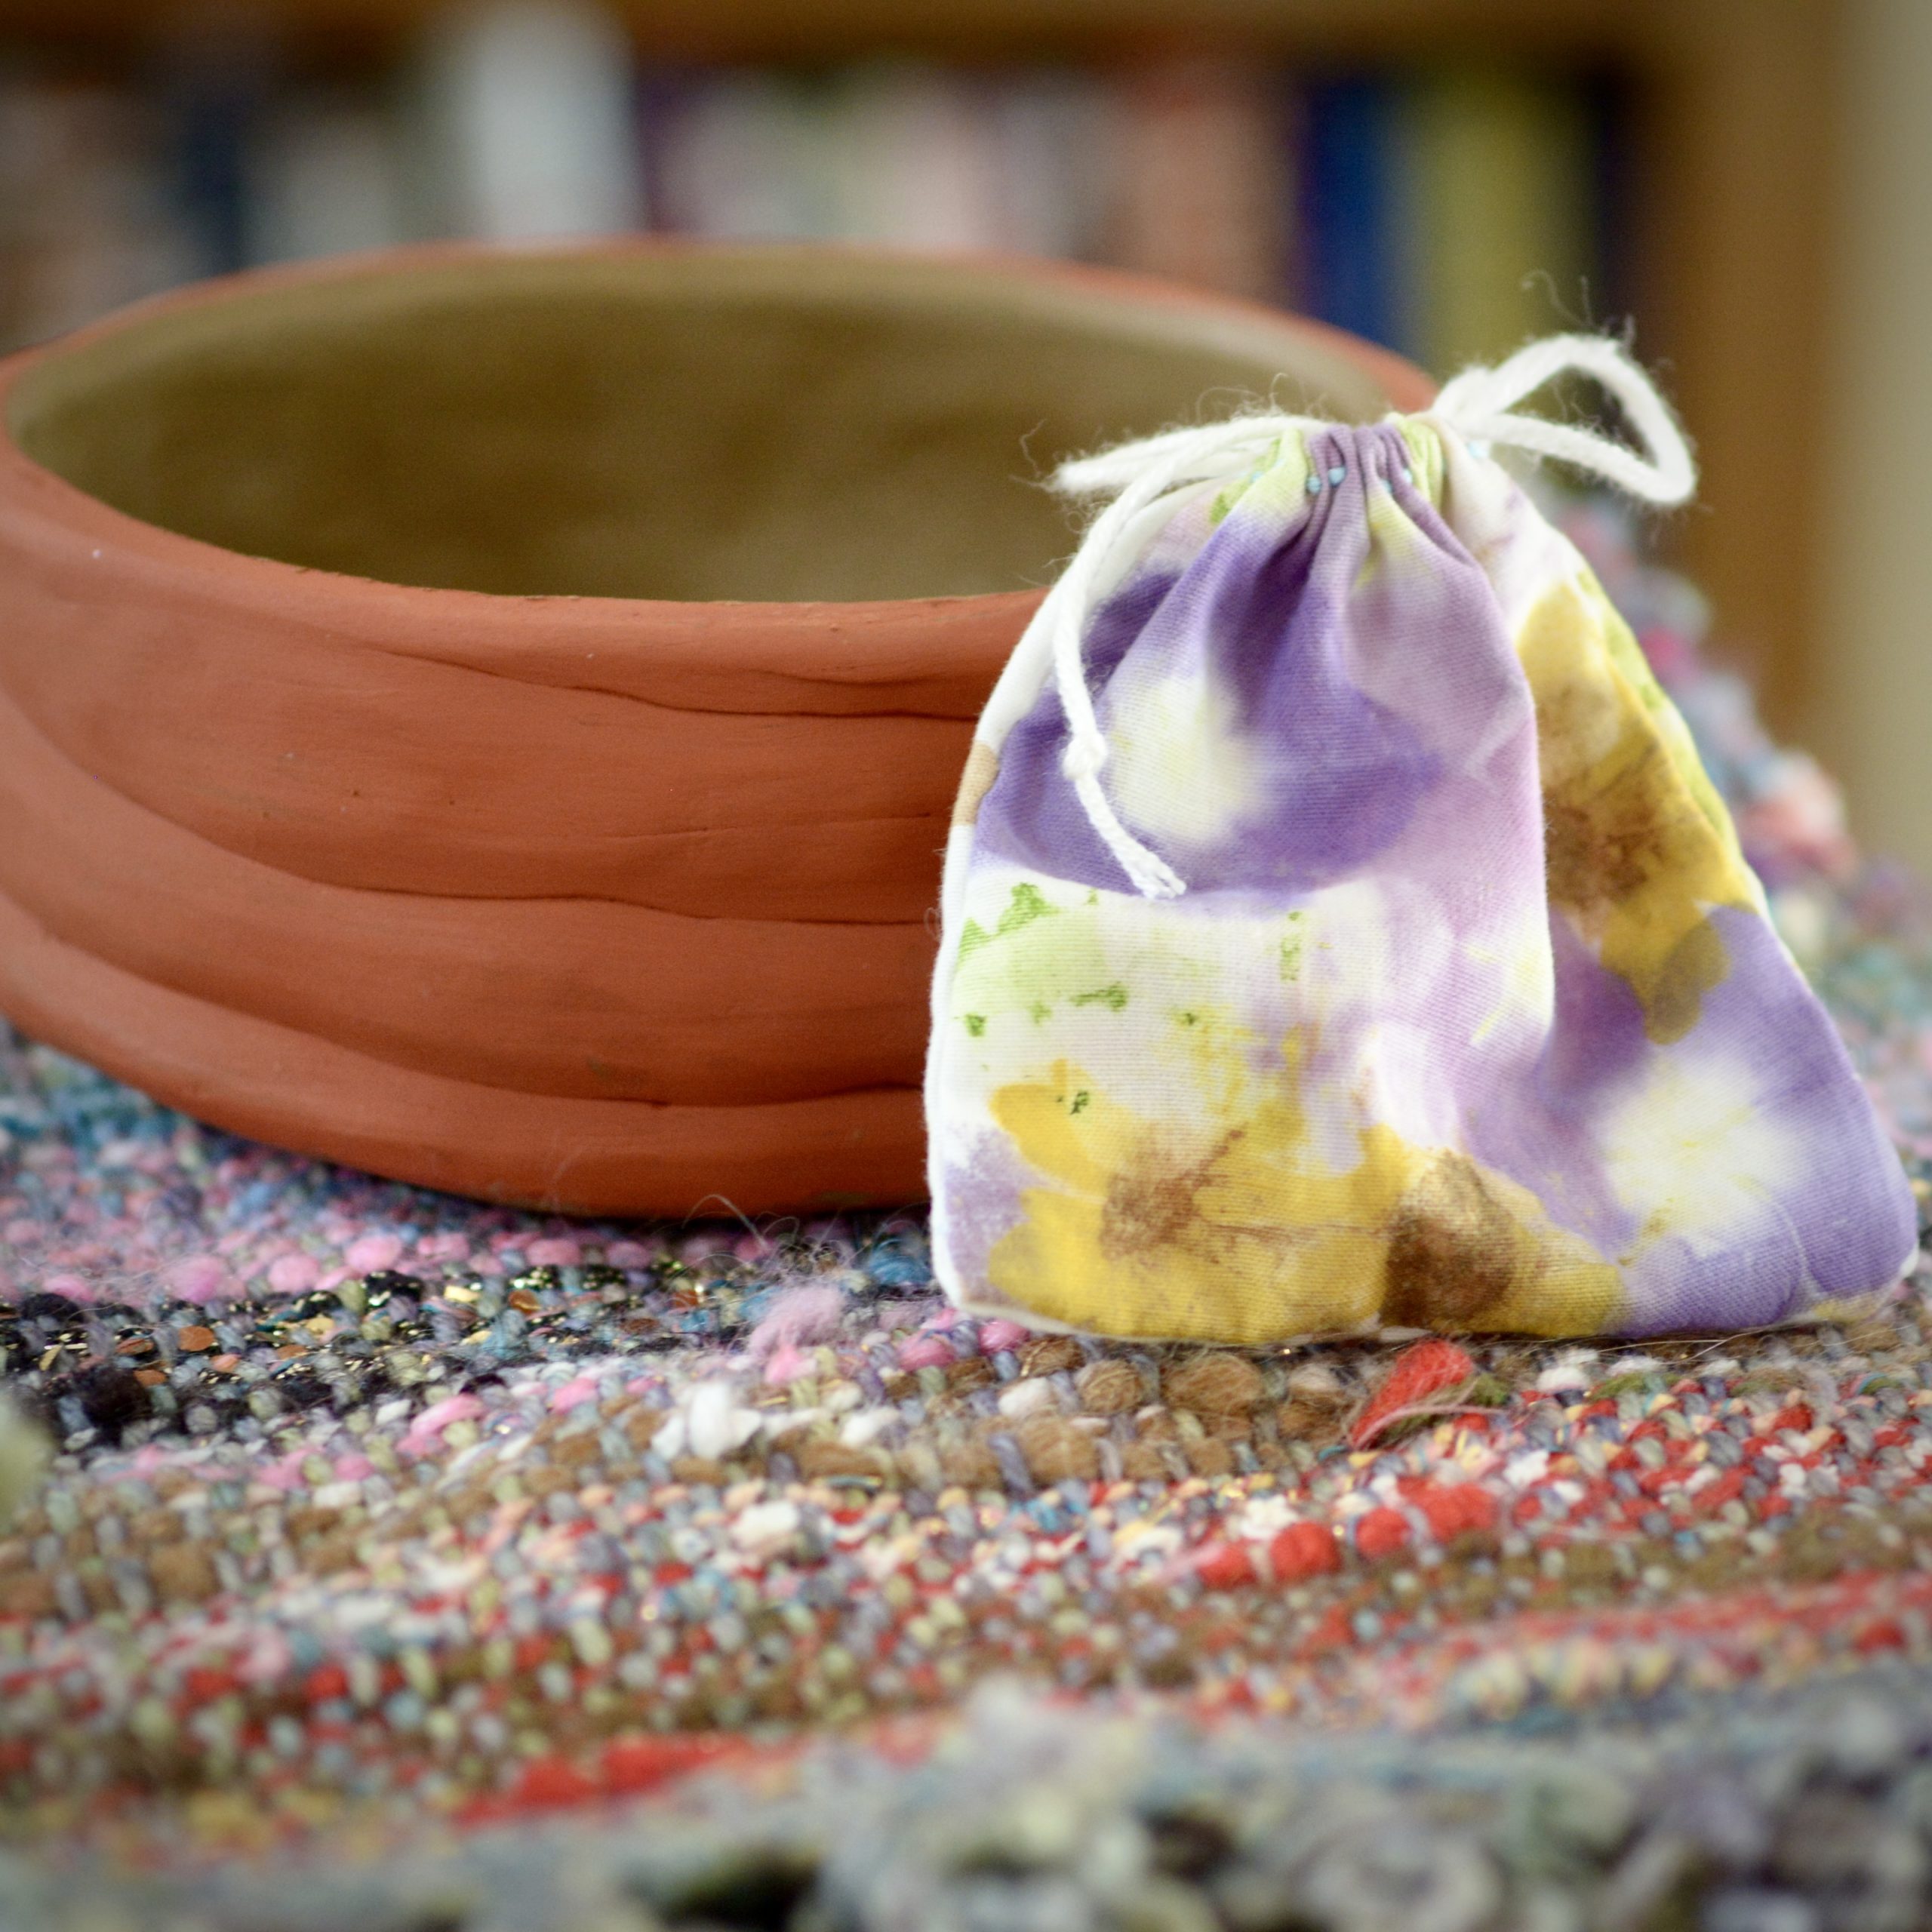 A small bag placed against a handmade coiled pot.